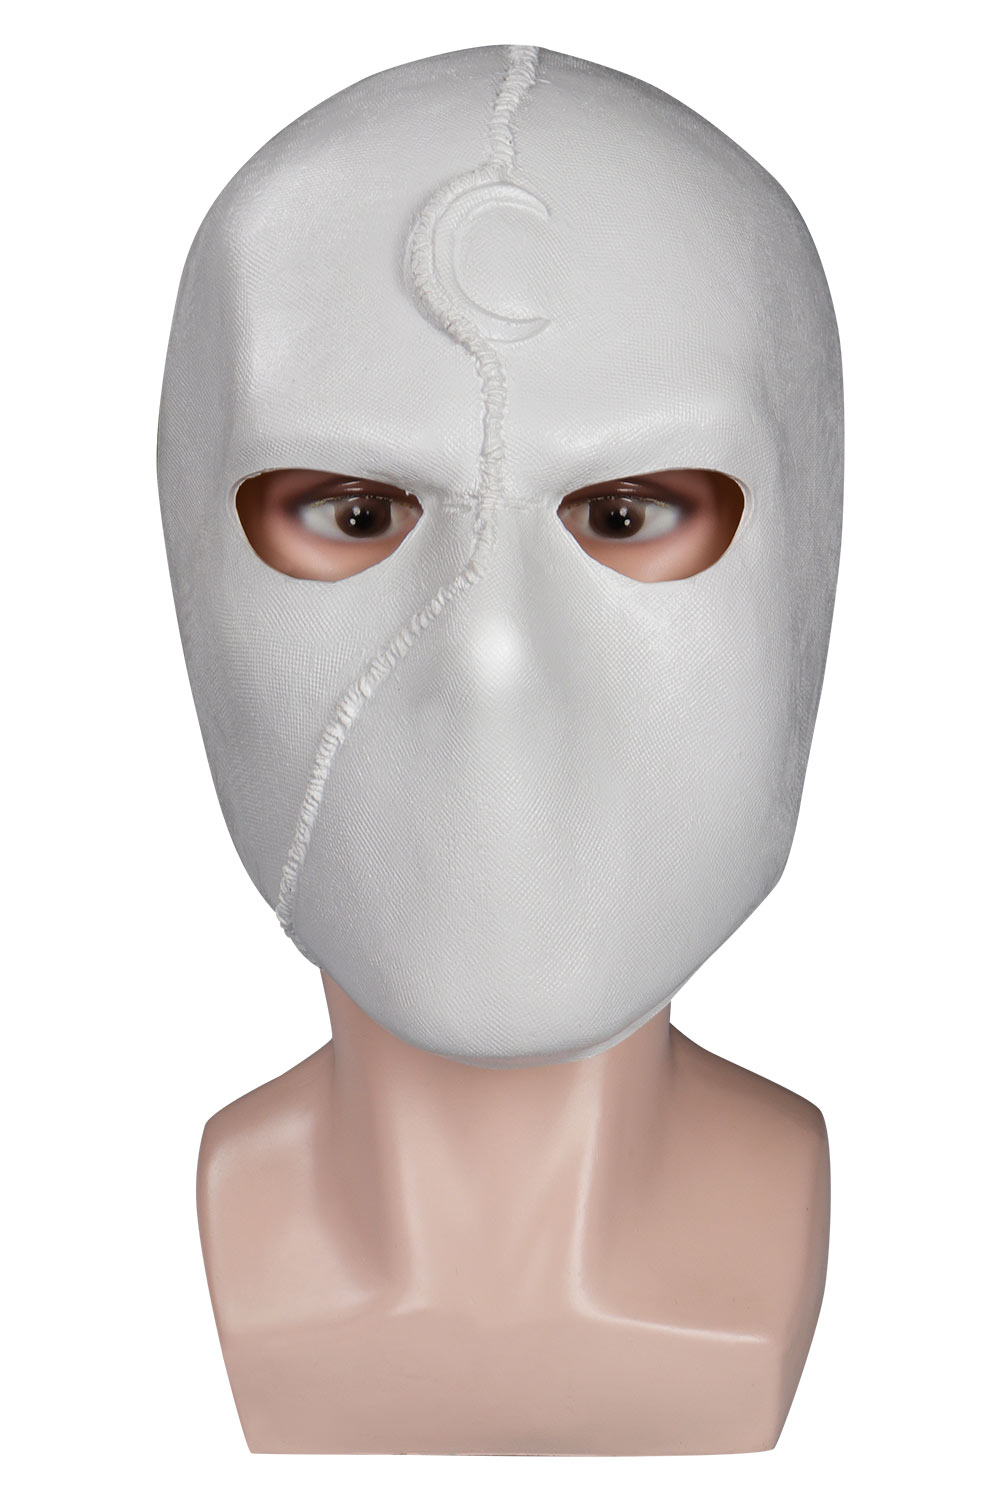 TV Moon Knight Marc Specto Mask Cosplay Latex Masks Halloween Costume Props